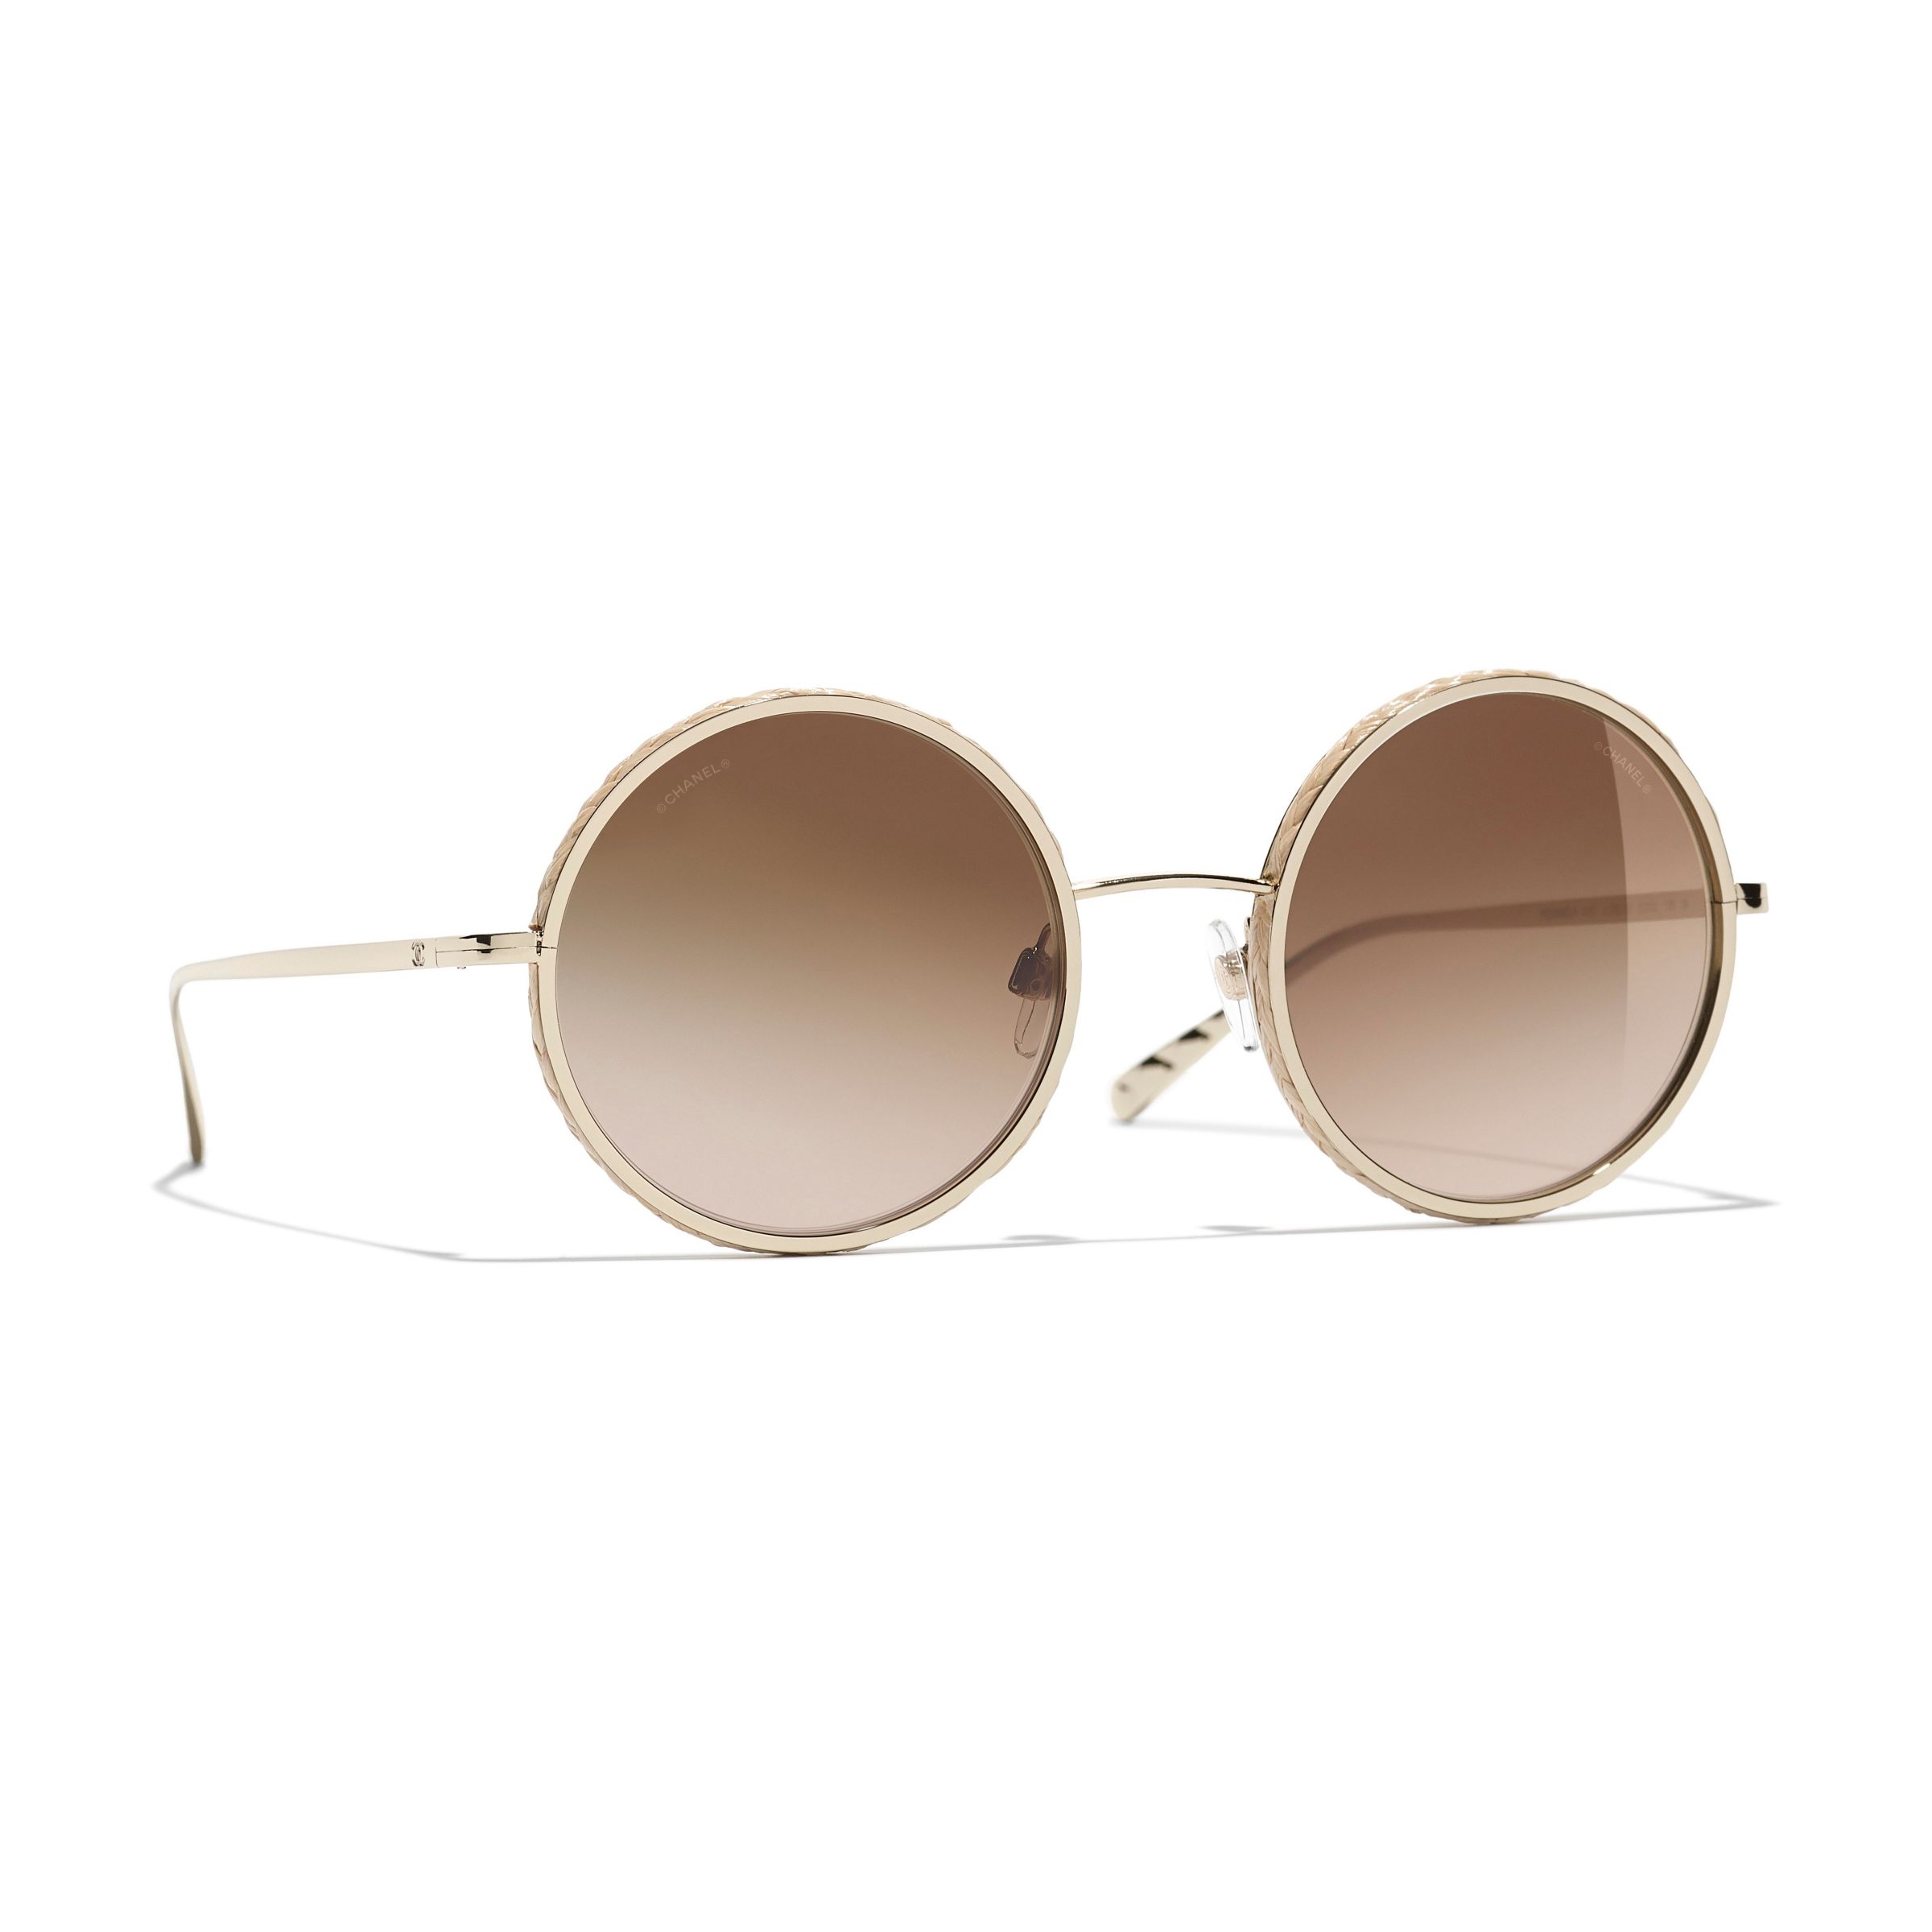 CHANEL Round Sunglasses CH4250 Gold/Brown Gradient at John Lewis & Partners